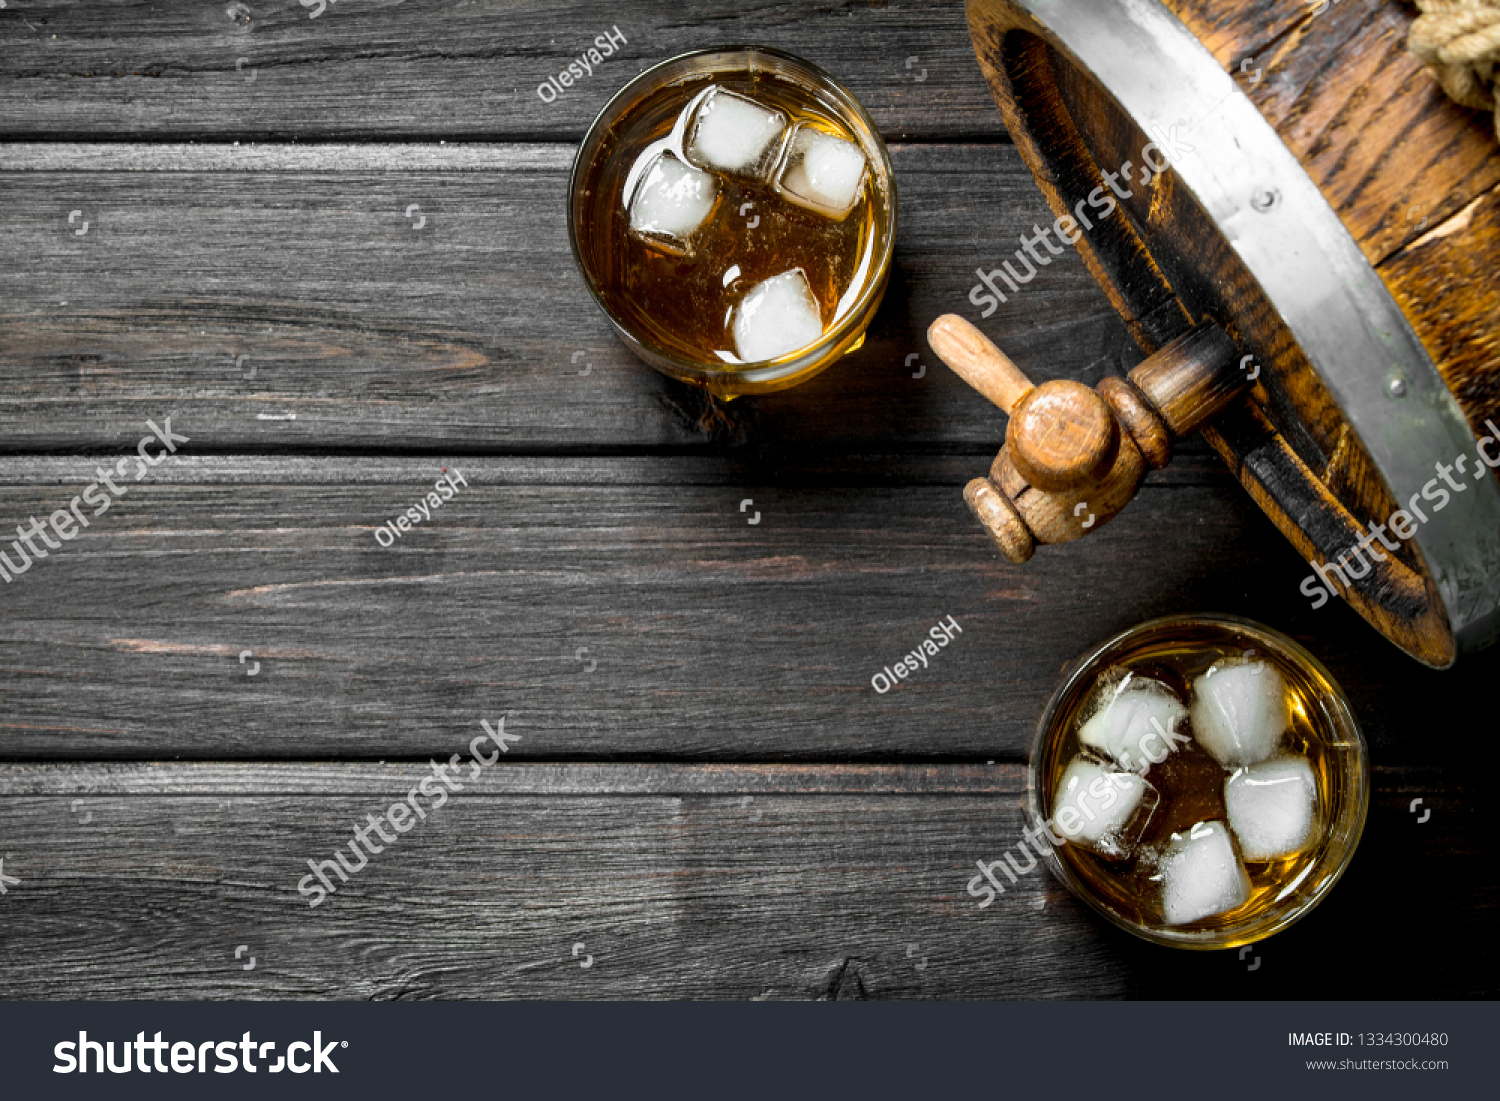 Whiskey in glasses with ice and a wooden barrel. On wooden background #1334300480